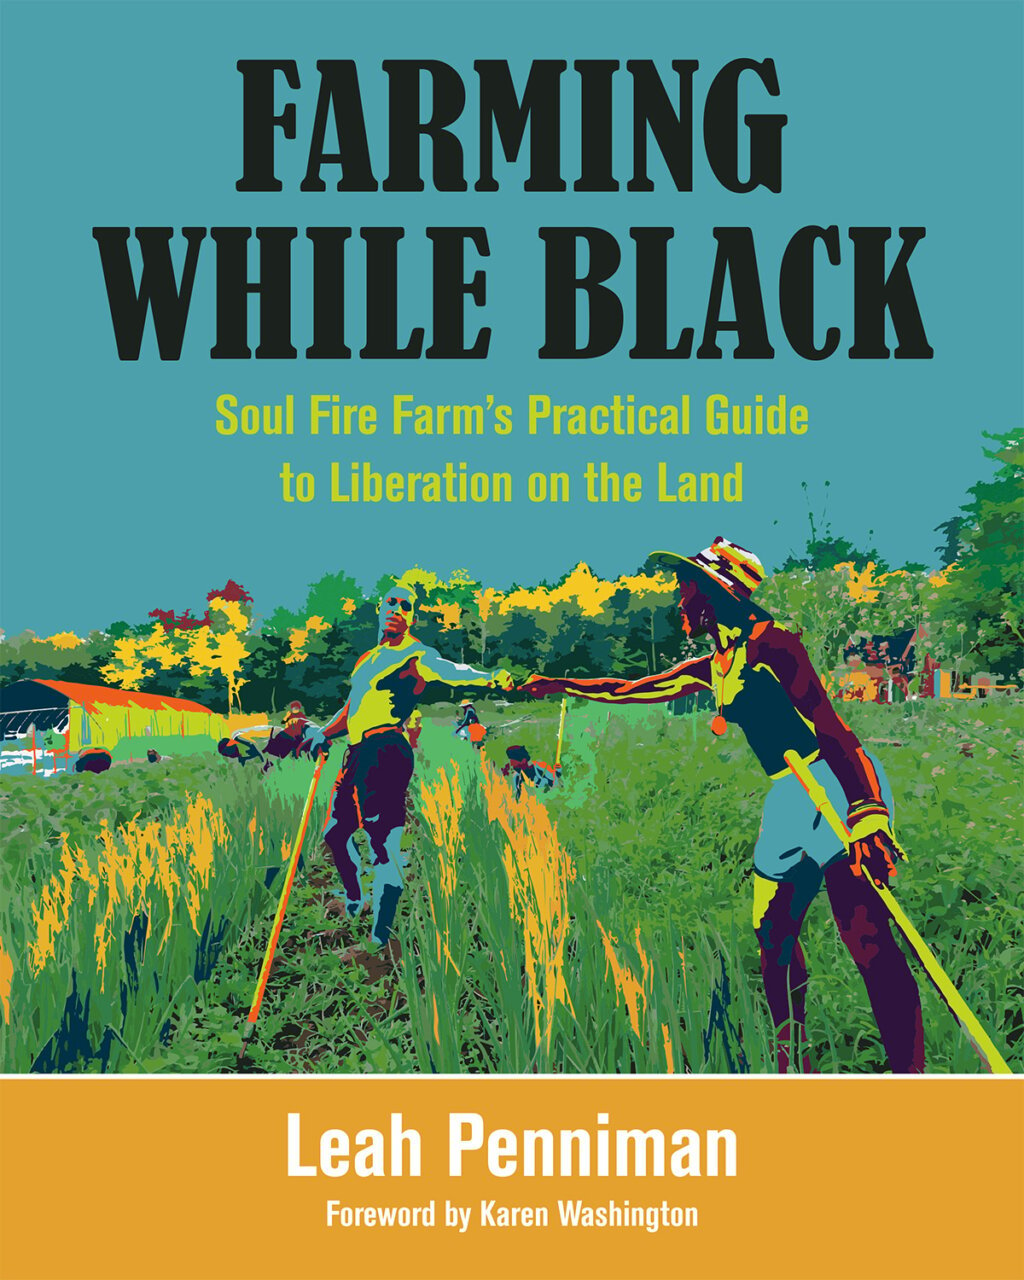 The Farming While Black cover